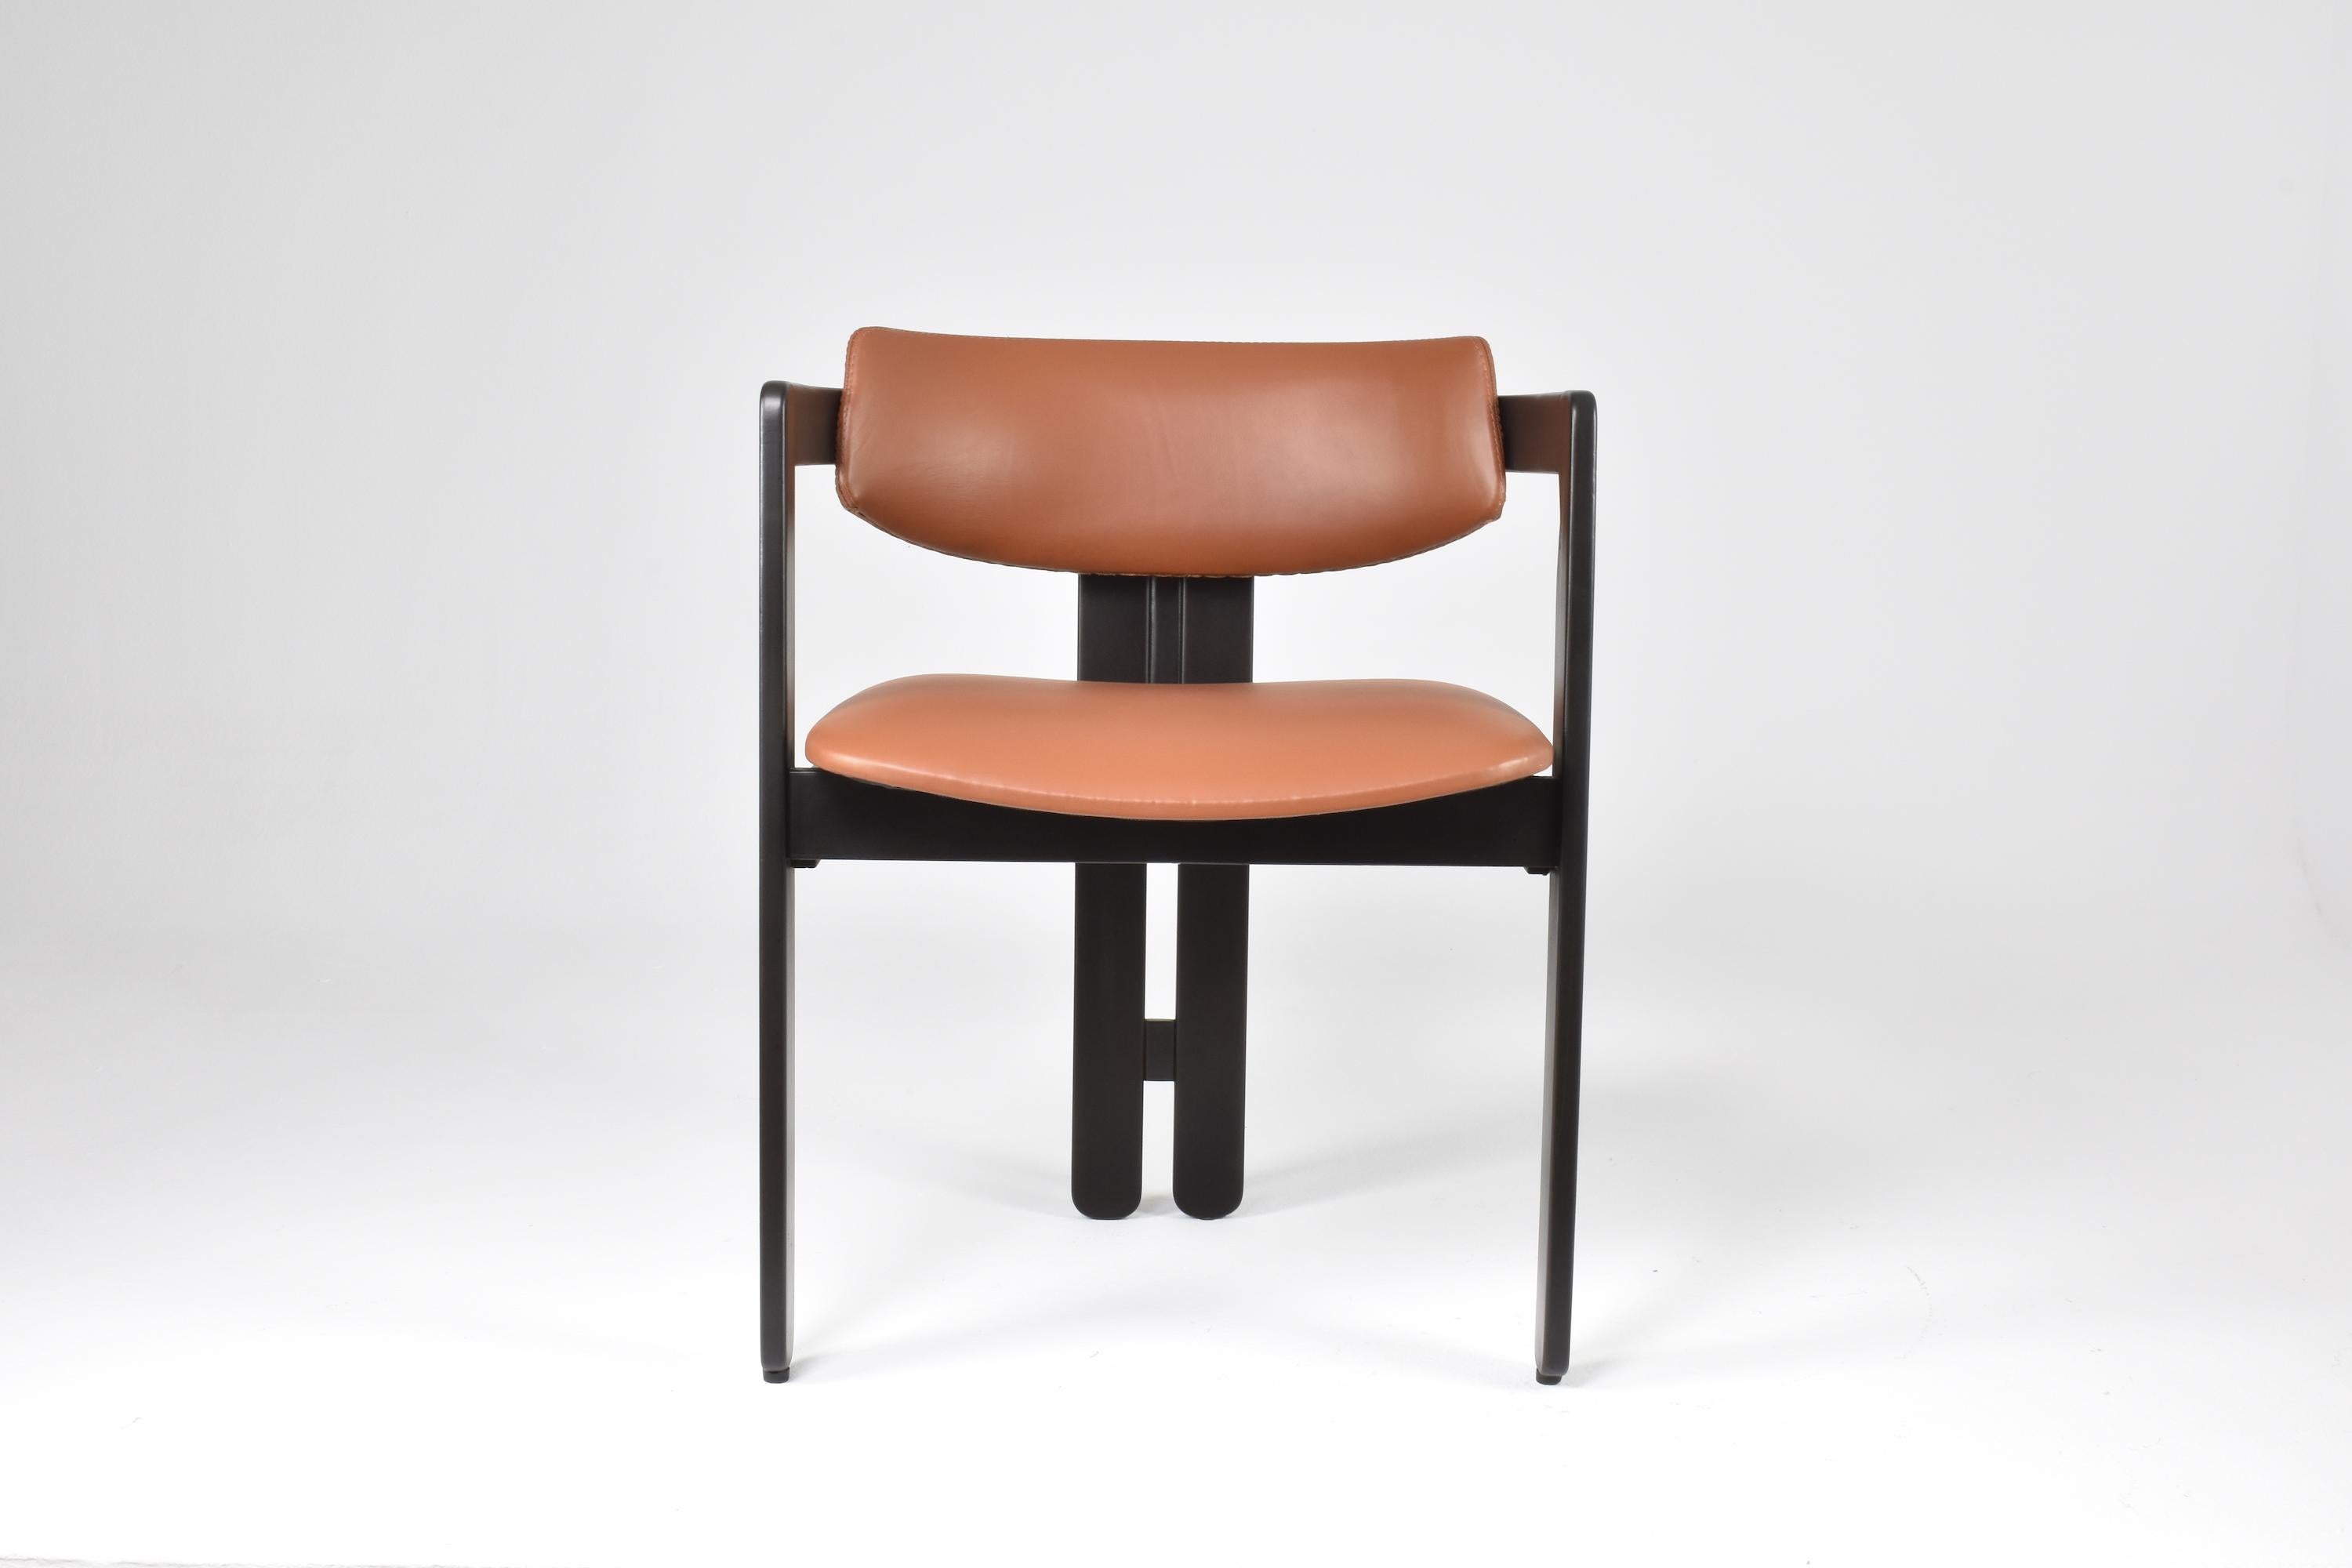 The Augusto Savini 'Pamplona' Chair is an iconic furniture piece designed in Italy and made in 1965. Augusto Savini was an esteemed Italian designer known for his innovative and modern furniture designs during the mid-20th century. 

It features a